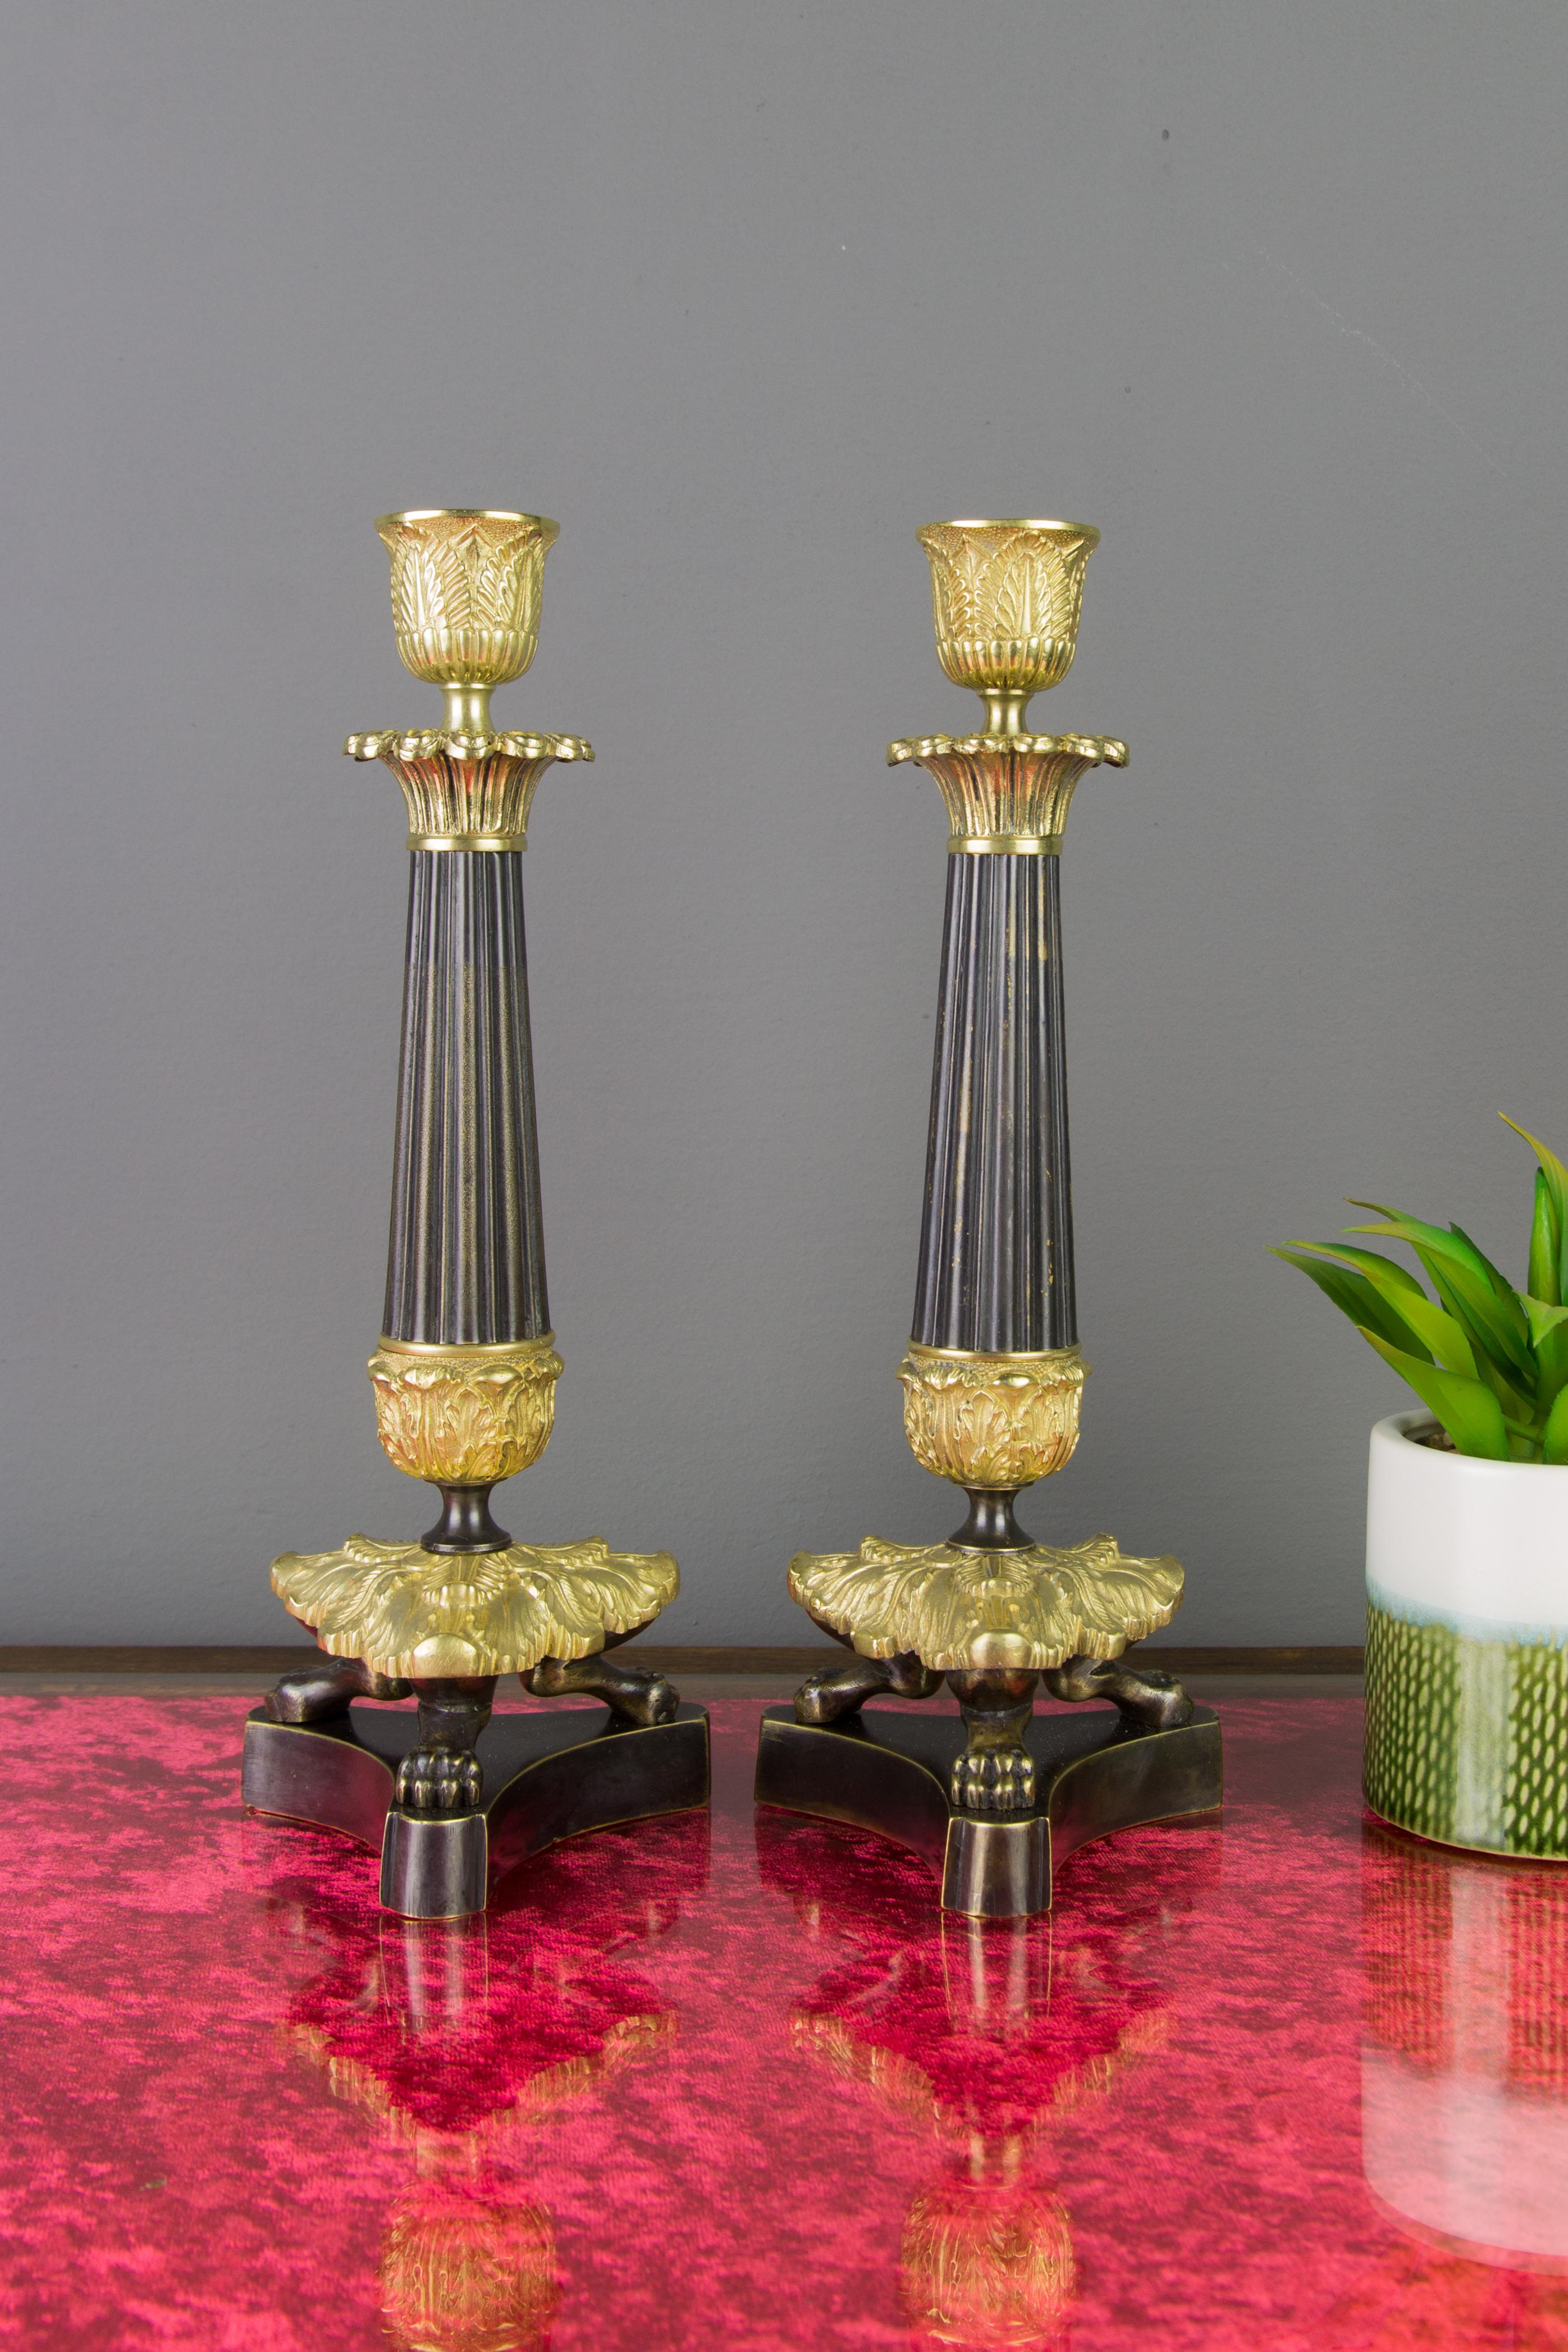 Very nice pair of French Empire style bronze and brass patinated candlesticks. Each candlestick features a fluted columnar stem, foliate collar, and is raised on three elaborately leaf-capped lion paws supports on a tripod base.
Dimensions: Height